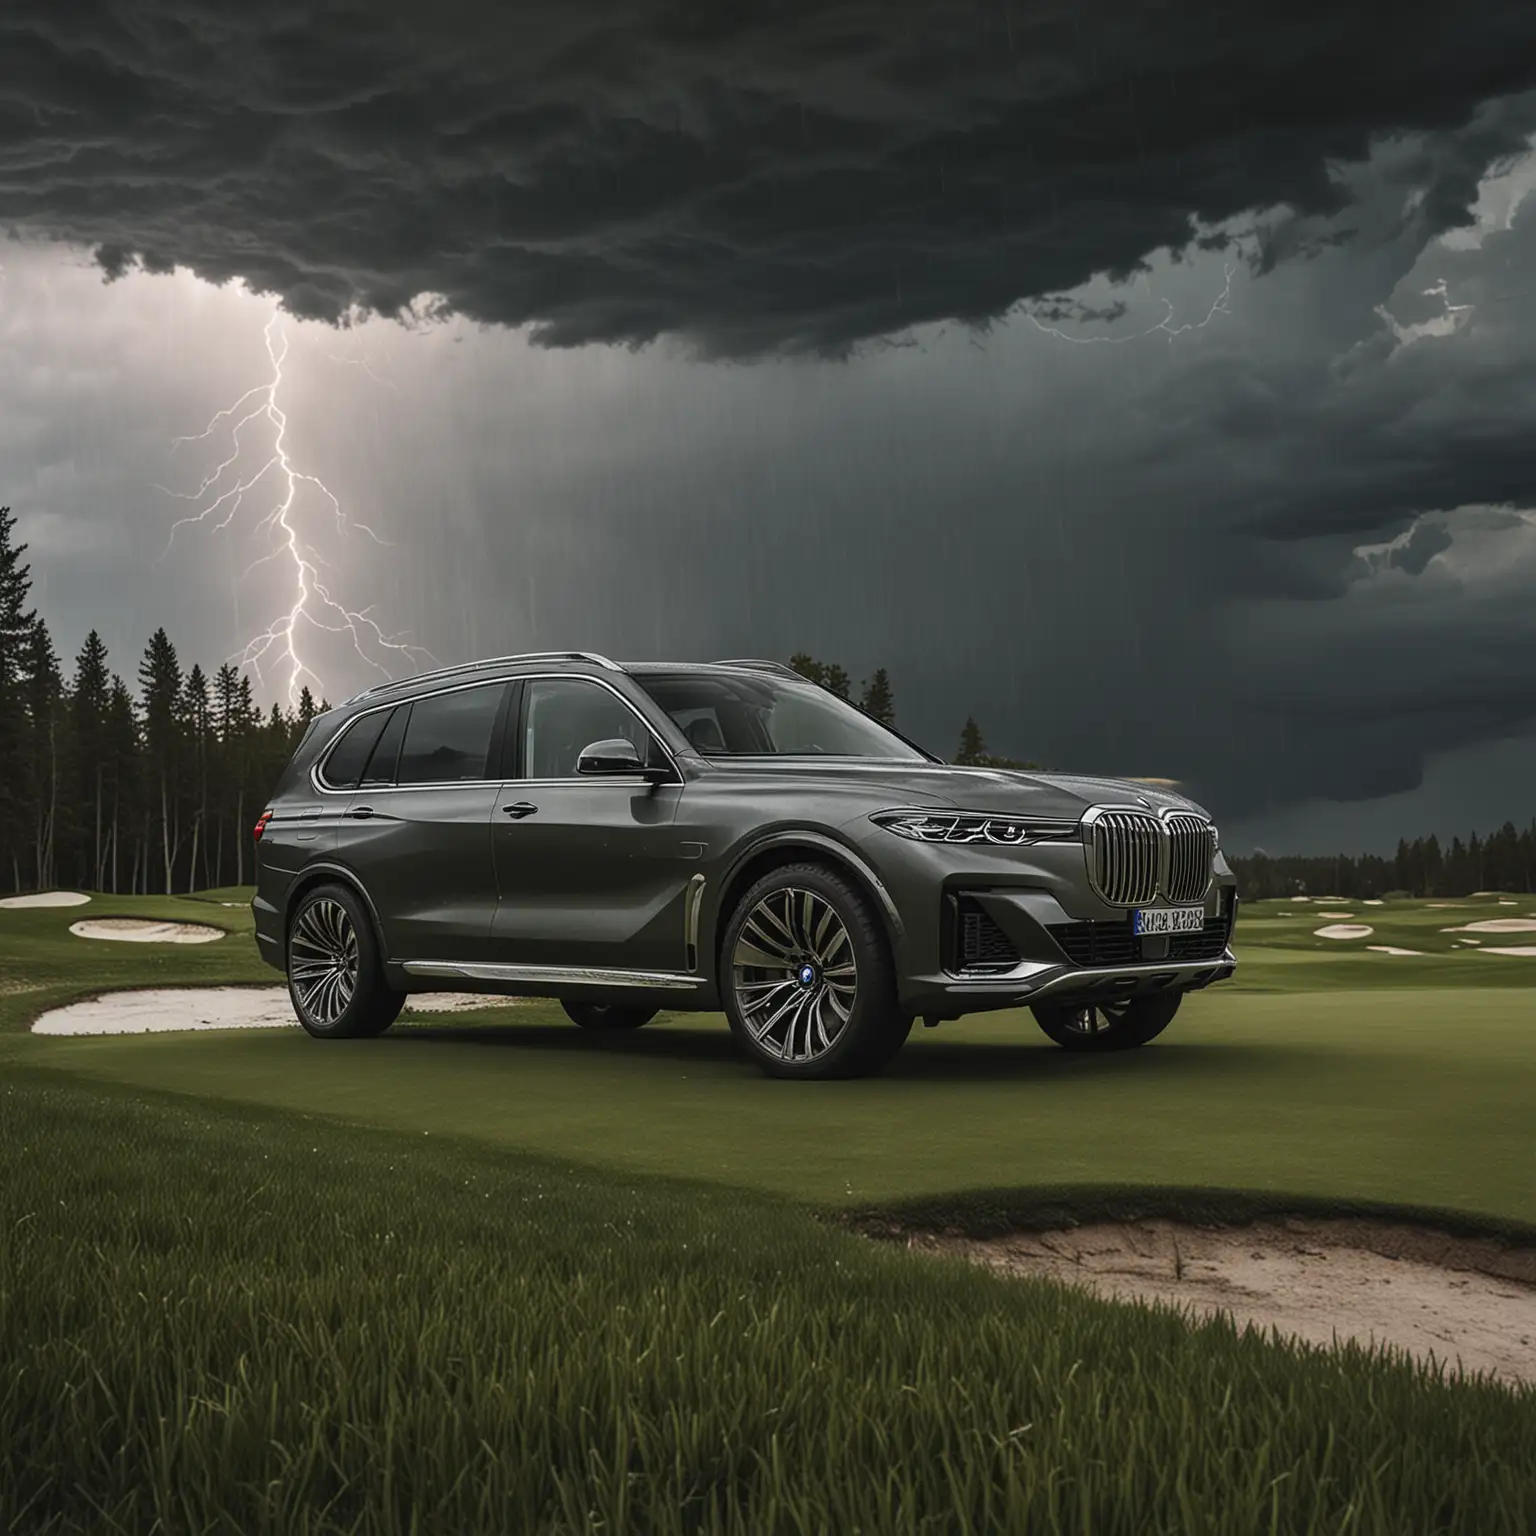 BMW X7 on a golf course with thunderstorm